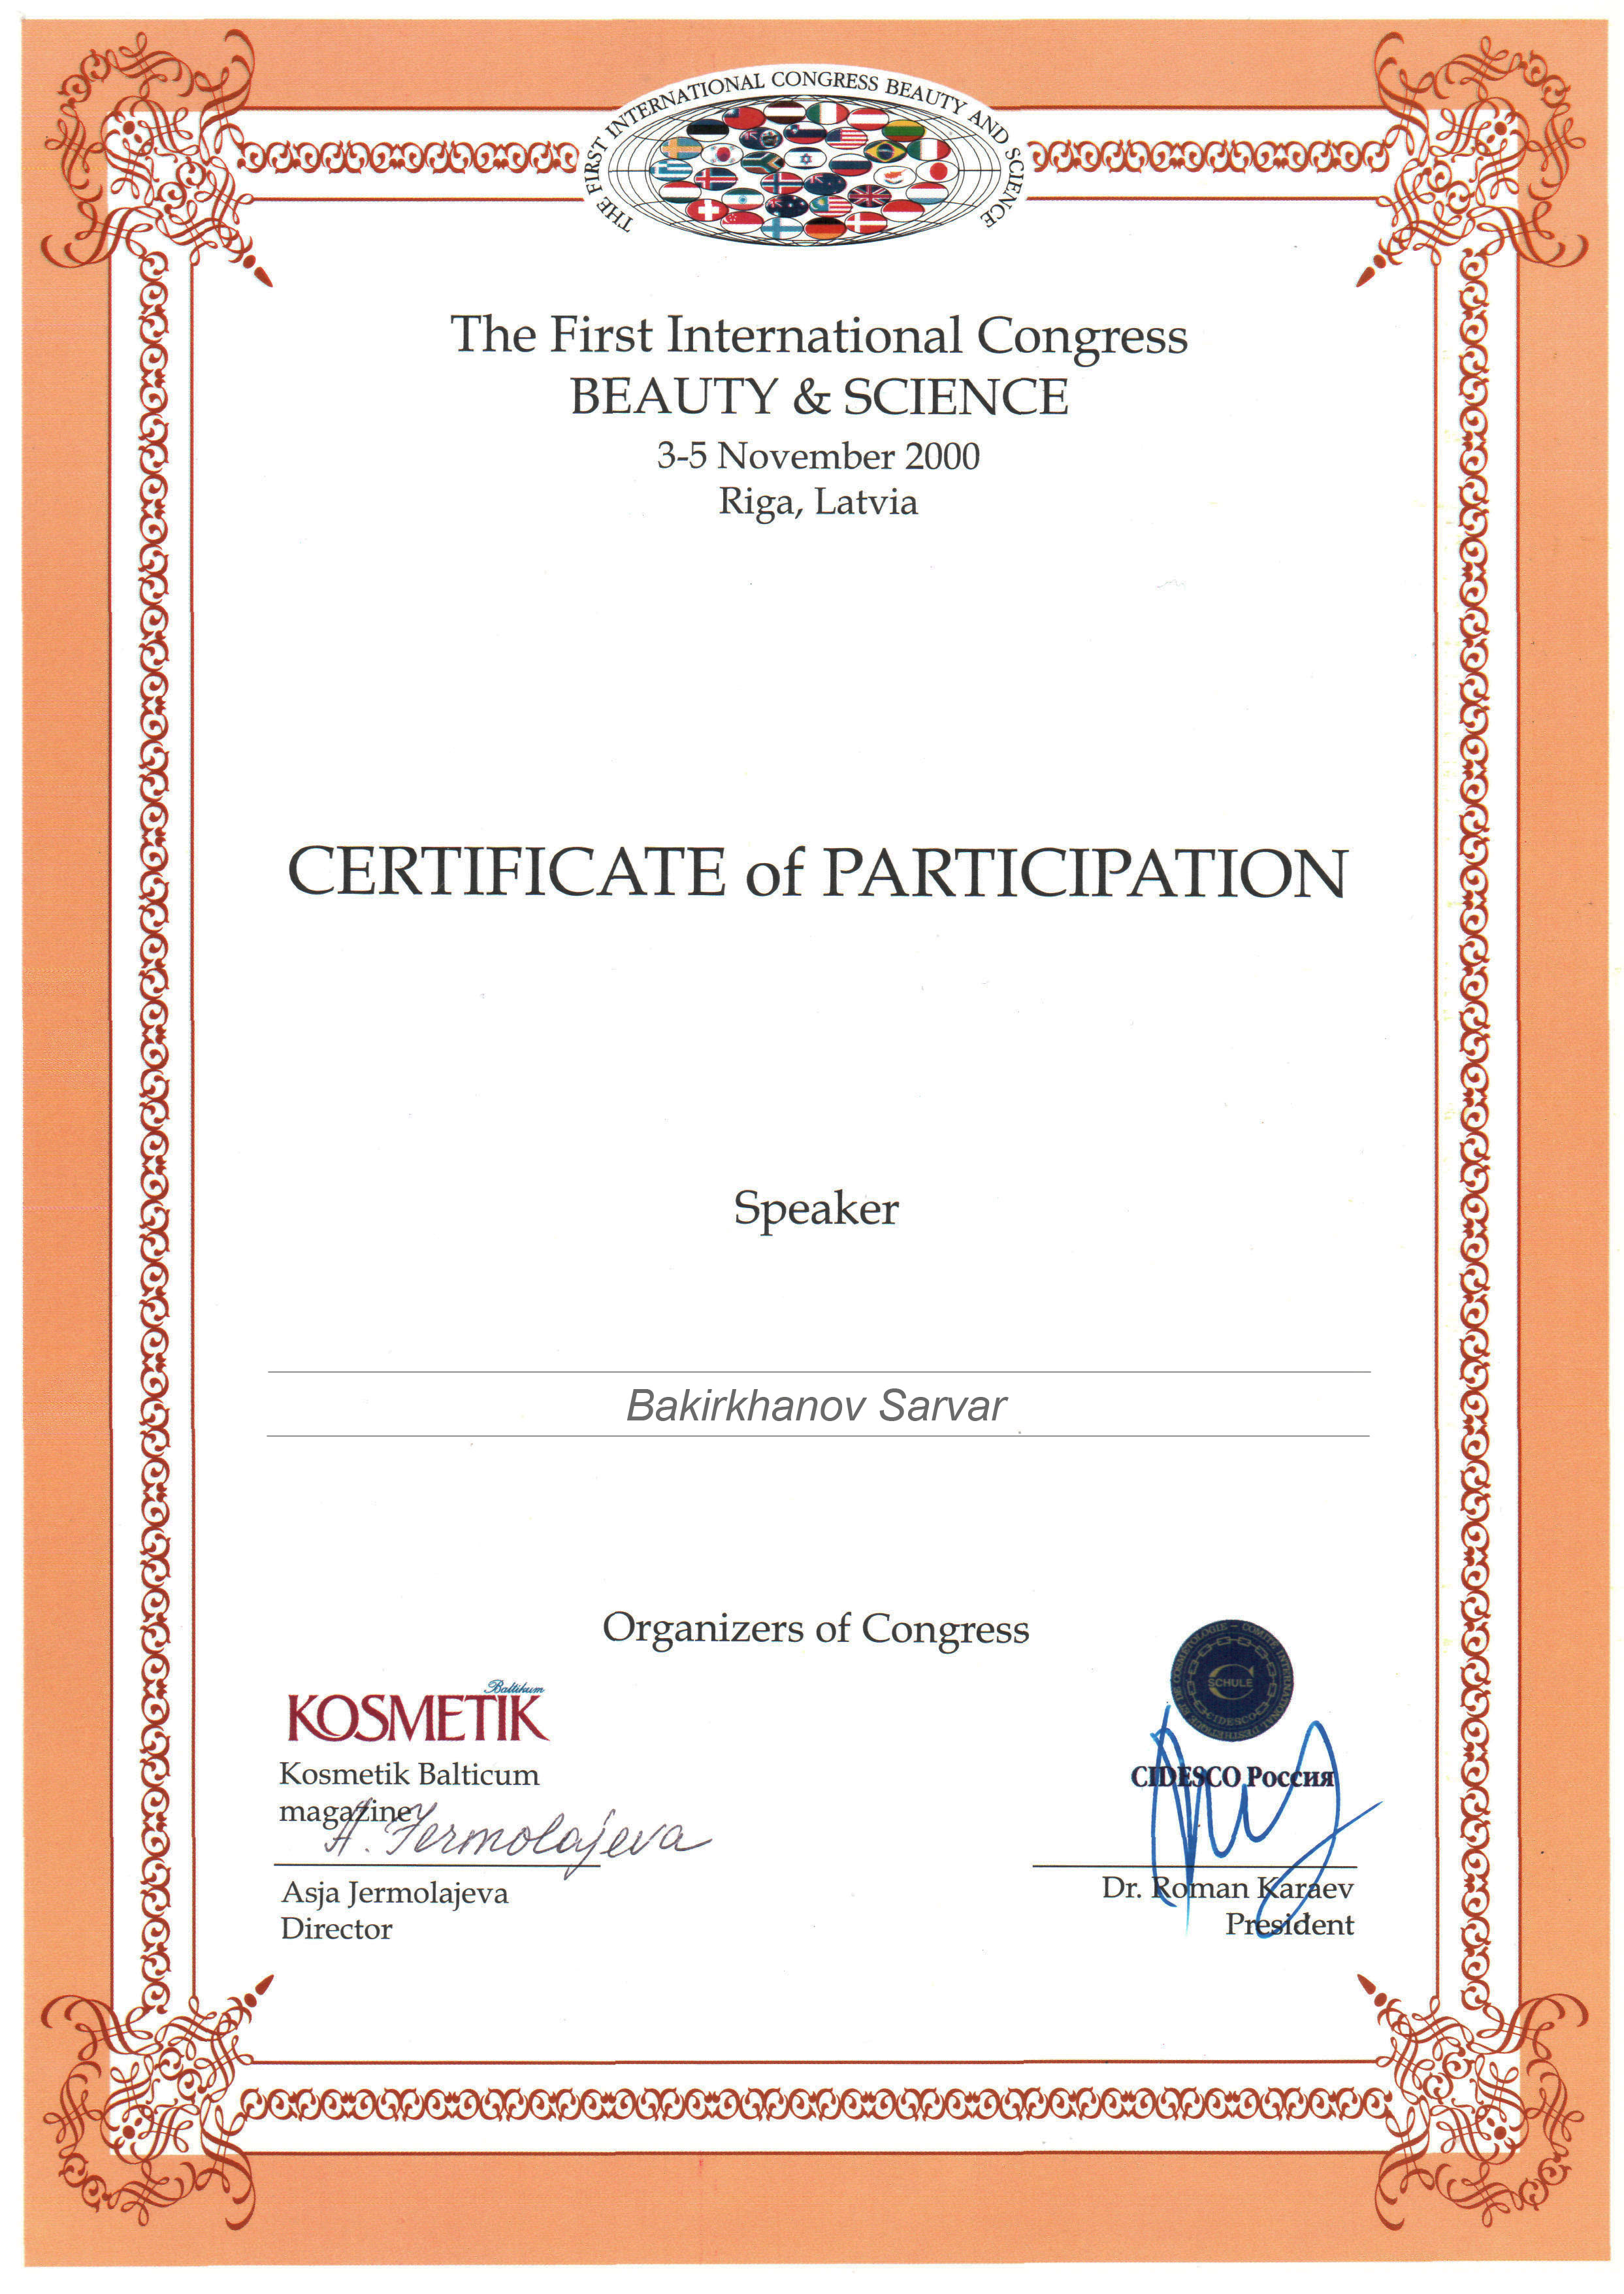 Certificate of Participation The First International Congress Beauty & Science